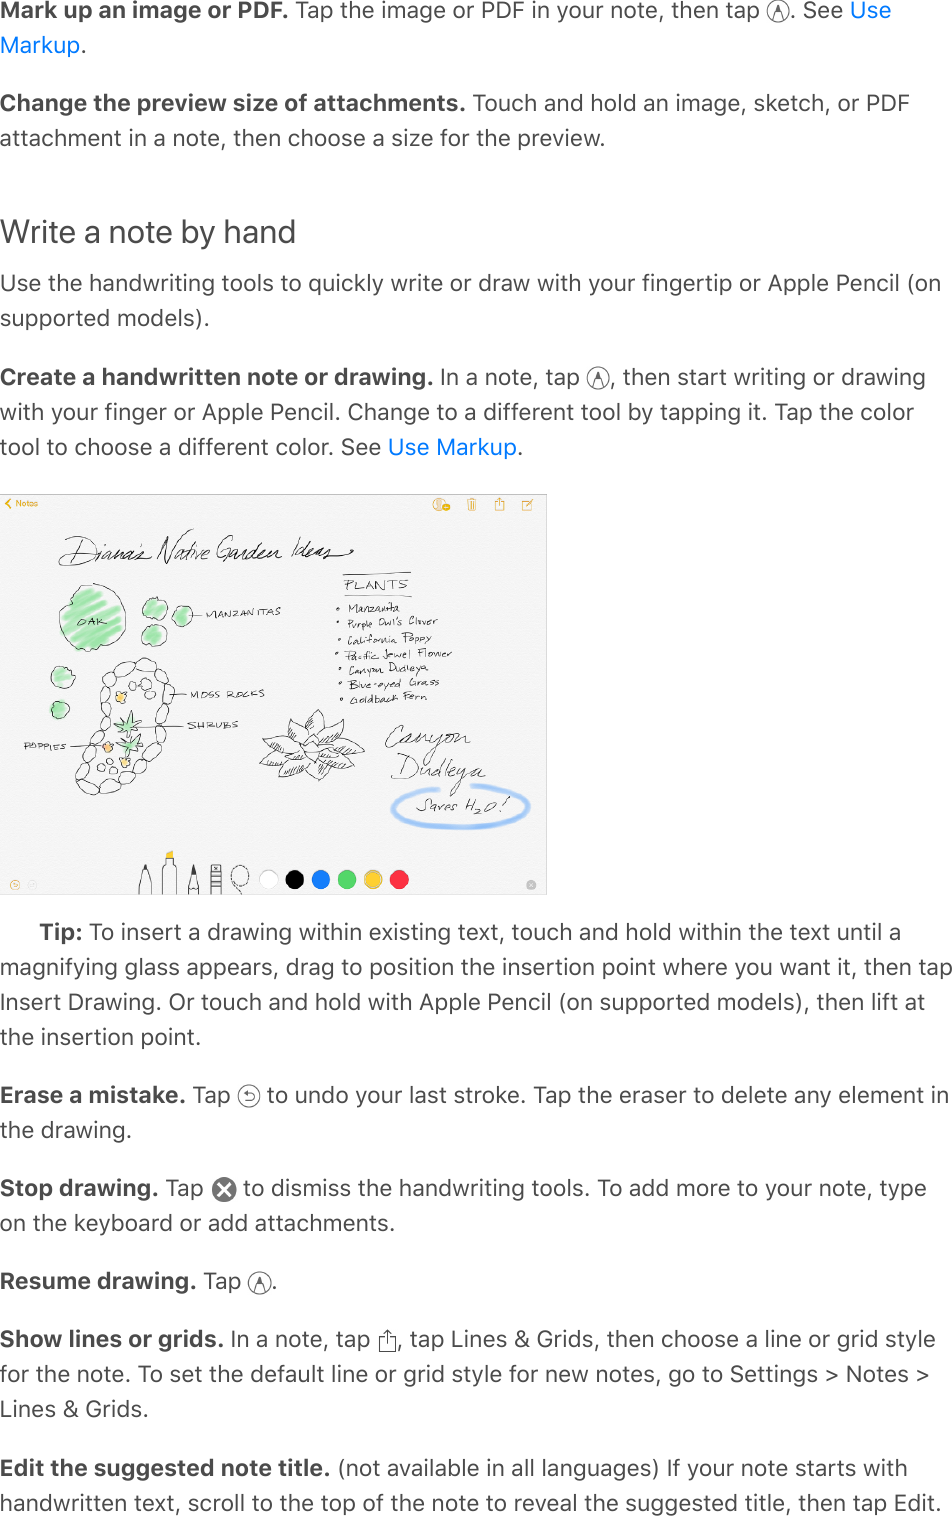 Mark up an image or PDF. Tap the image or PDF in your note, then tap  . See .Change the preview size of attachments. Touch and hold an image, sketch, or PDFattachment in a note, then choose a size for the preview.Write a note by handUse the handwriting tools to quickly write or draw with your fingertip or Apple Pencil (onsupported models).Create a handwritten note or drawing. In a note, tap  , then start writing or drawingwith your finger or Apple Pencil. Change to a different tool by tapping it. Tap the colortool to choose a different color. See  .Tip: To insert a drawing within existing text, touch and hold within the text until amagnifying glass appears, drag to position the insertion point where you want it, then tapInsert Drawing. Or touch and hold with Apple Pencil (on supported models), then lift atthe insertion point.Erase a mistake. Tap   to undo your last stroke. Tap the eraser to delete any element inthe drawing.Stop drawing. Tap   to dismiss the handwriting tools. To add more to your note, typeon the keyboard or add attachments.Resume drawing. Tap  .Show lines or grids. In a note, tap  , tap Lines &amp; Grids, then choose a line or grid stylefor the note. To set the default line or grid style for new notes, go to Settings &gt; Notes &gt;Lines &amp; Grids.Edit the suggested note title. (not available in all languages) If your note starts withhandwritten text, scroll to the top of the note to reveal the suggested title, then tap Edit.UseMarkupUse Markup